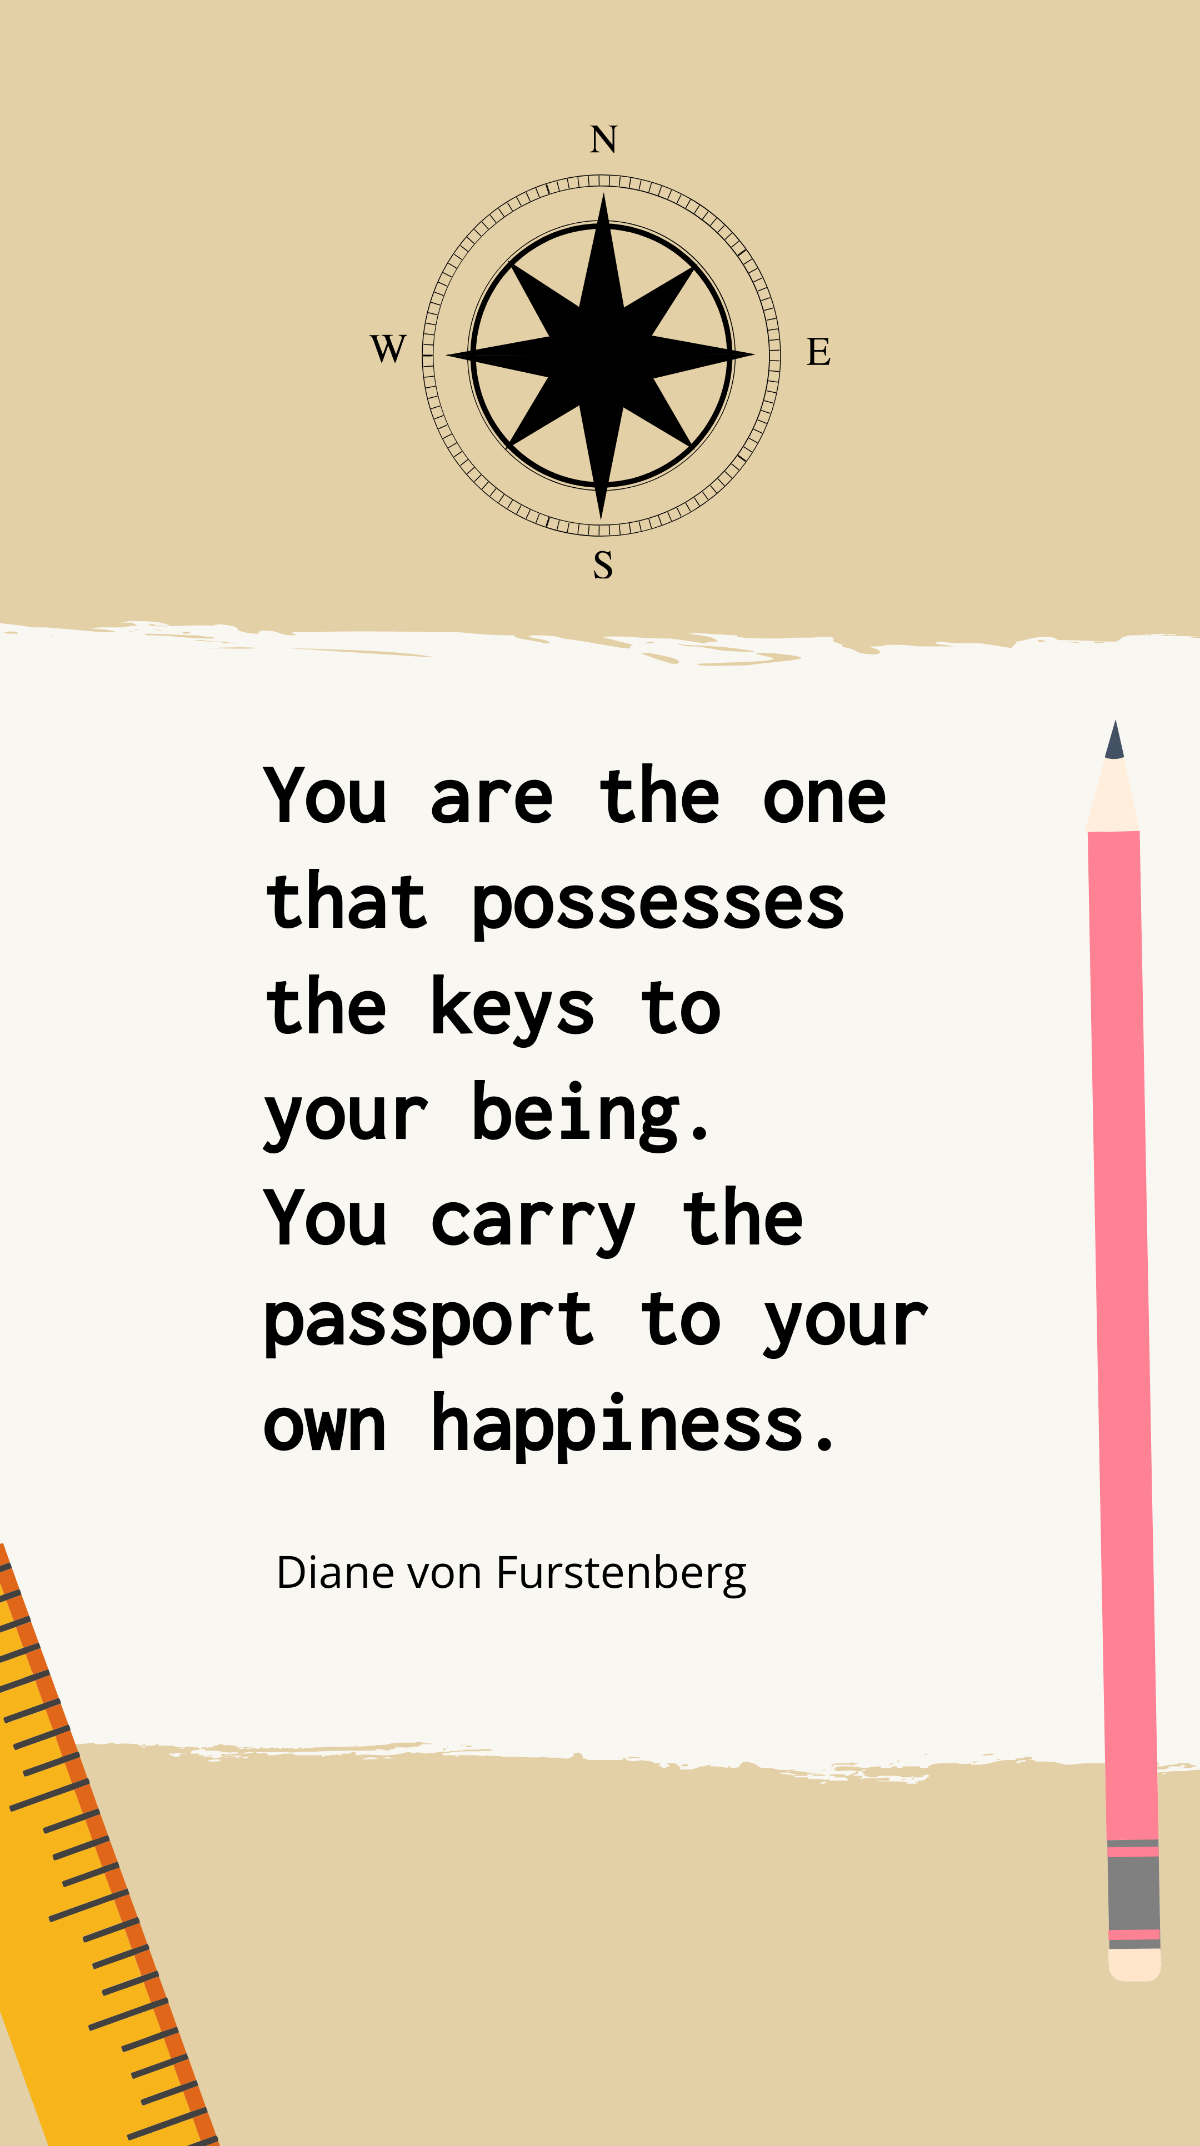 Diane von Furstenberg - You are the one that possesses the keys to your being. You carry the passport to your own happiness. Template